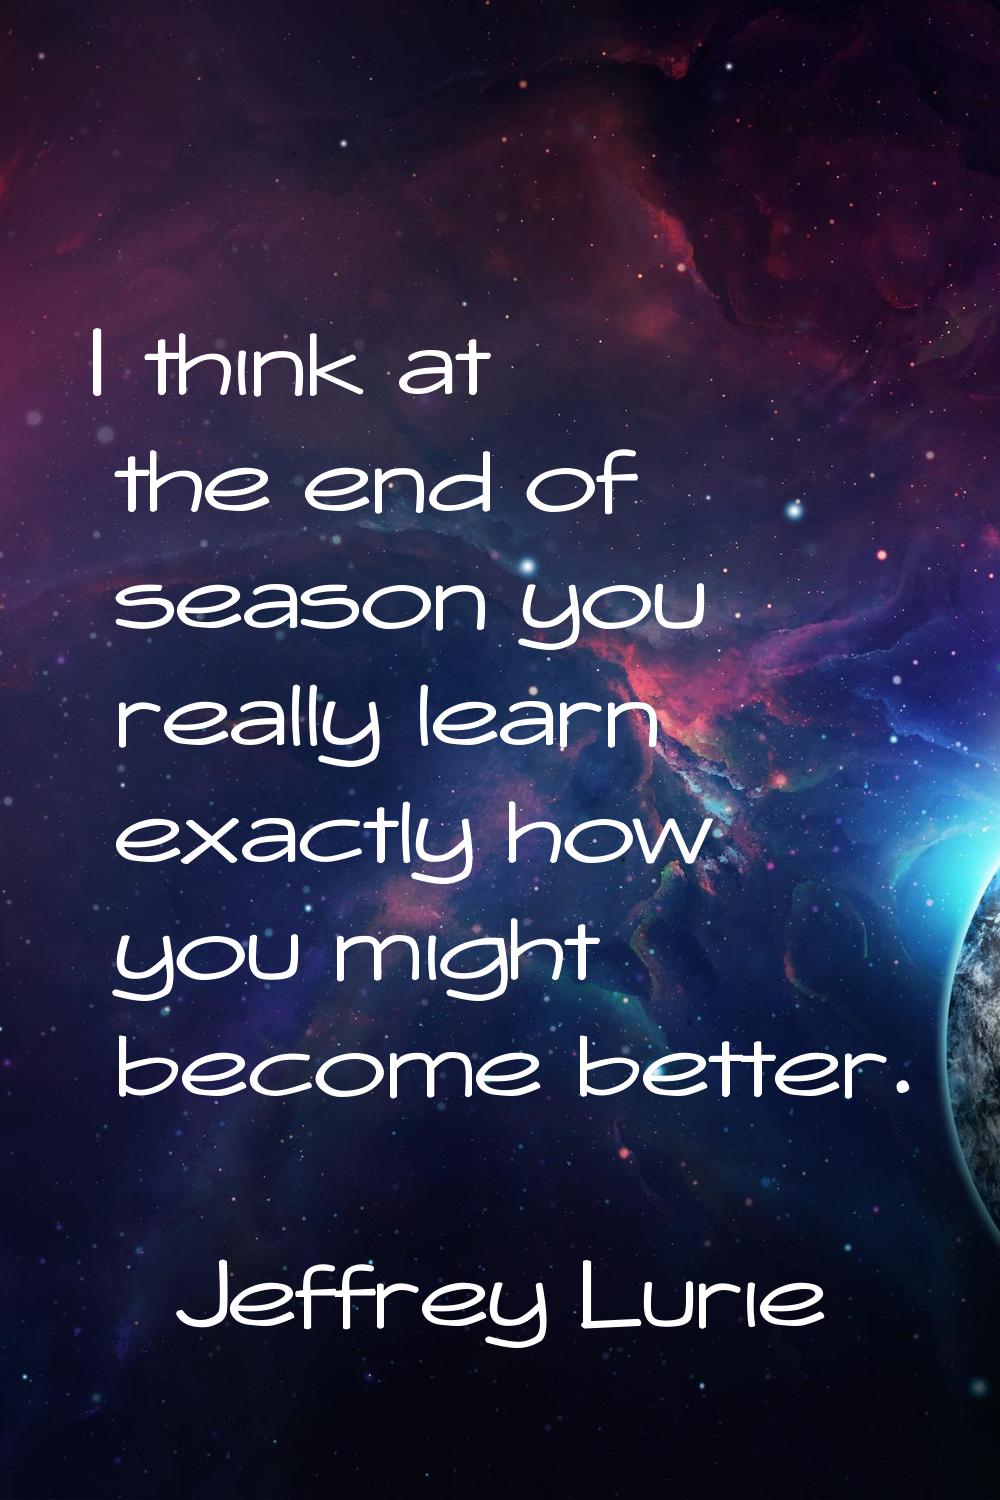 I think at the end of season you really learn exactly how you might become better.